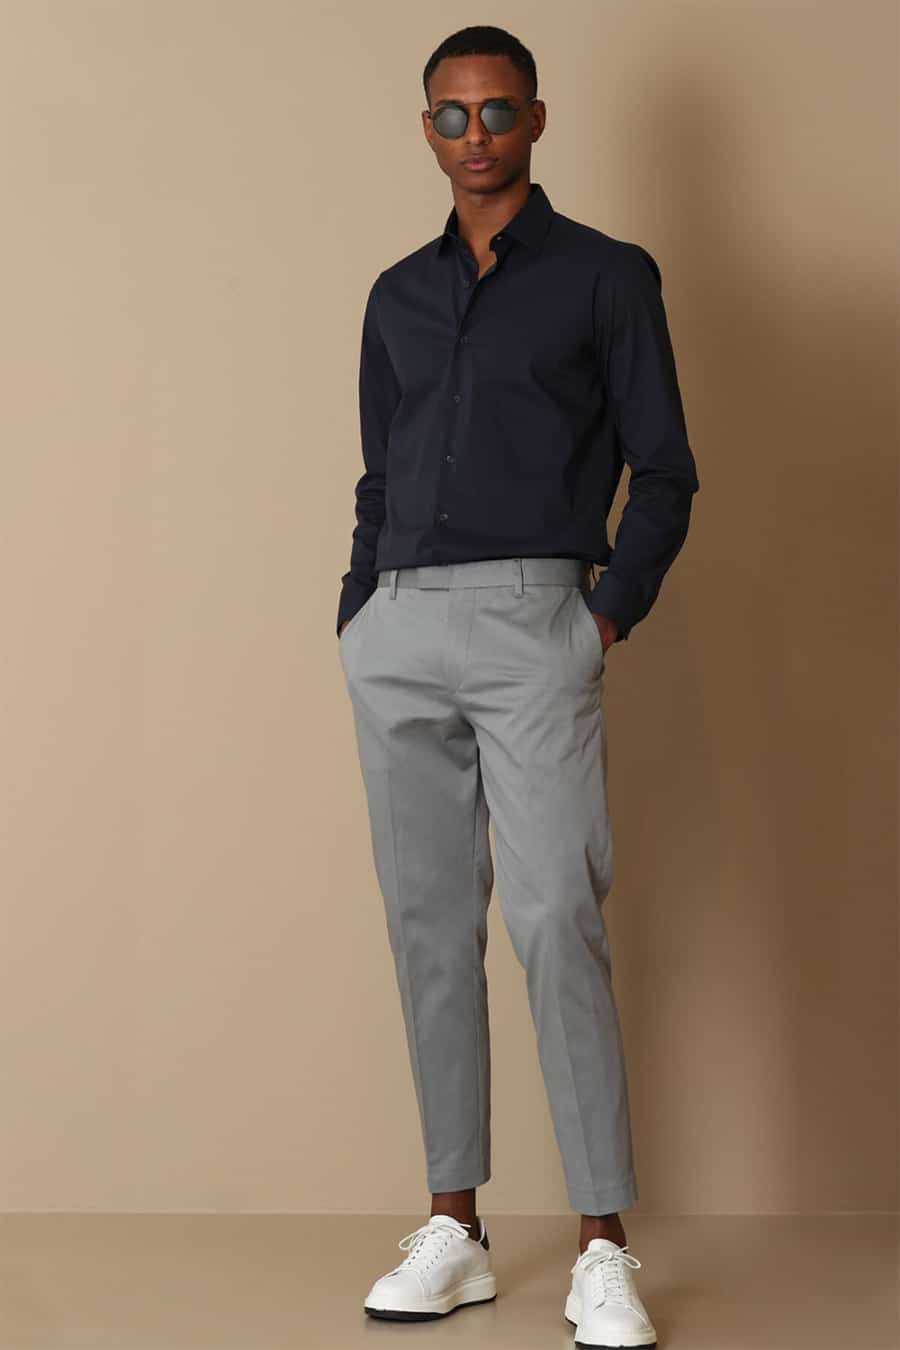 Buy Light Grey Formal Trousers For Male Online @ Best Prices in India |  Uniform Bucket | UNIFORM BUCKET